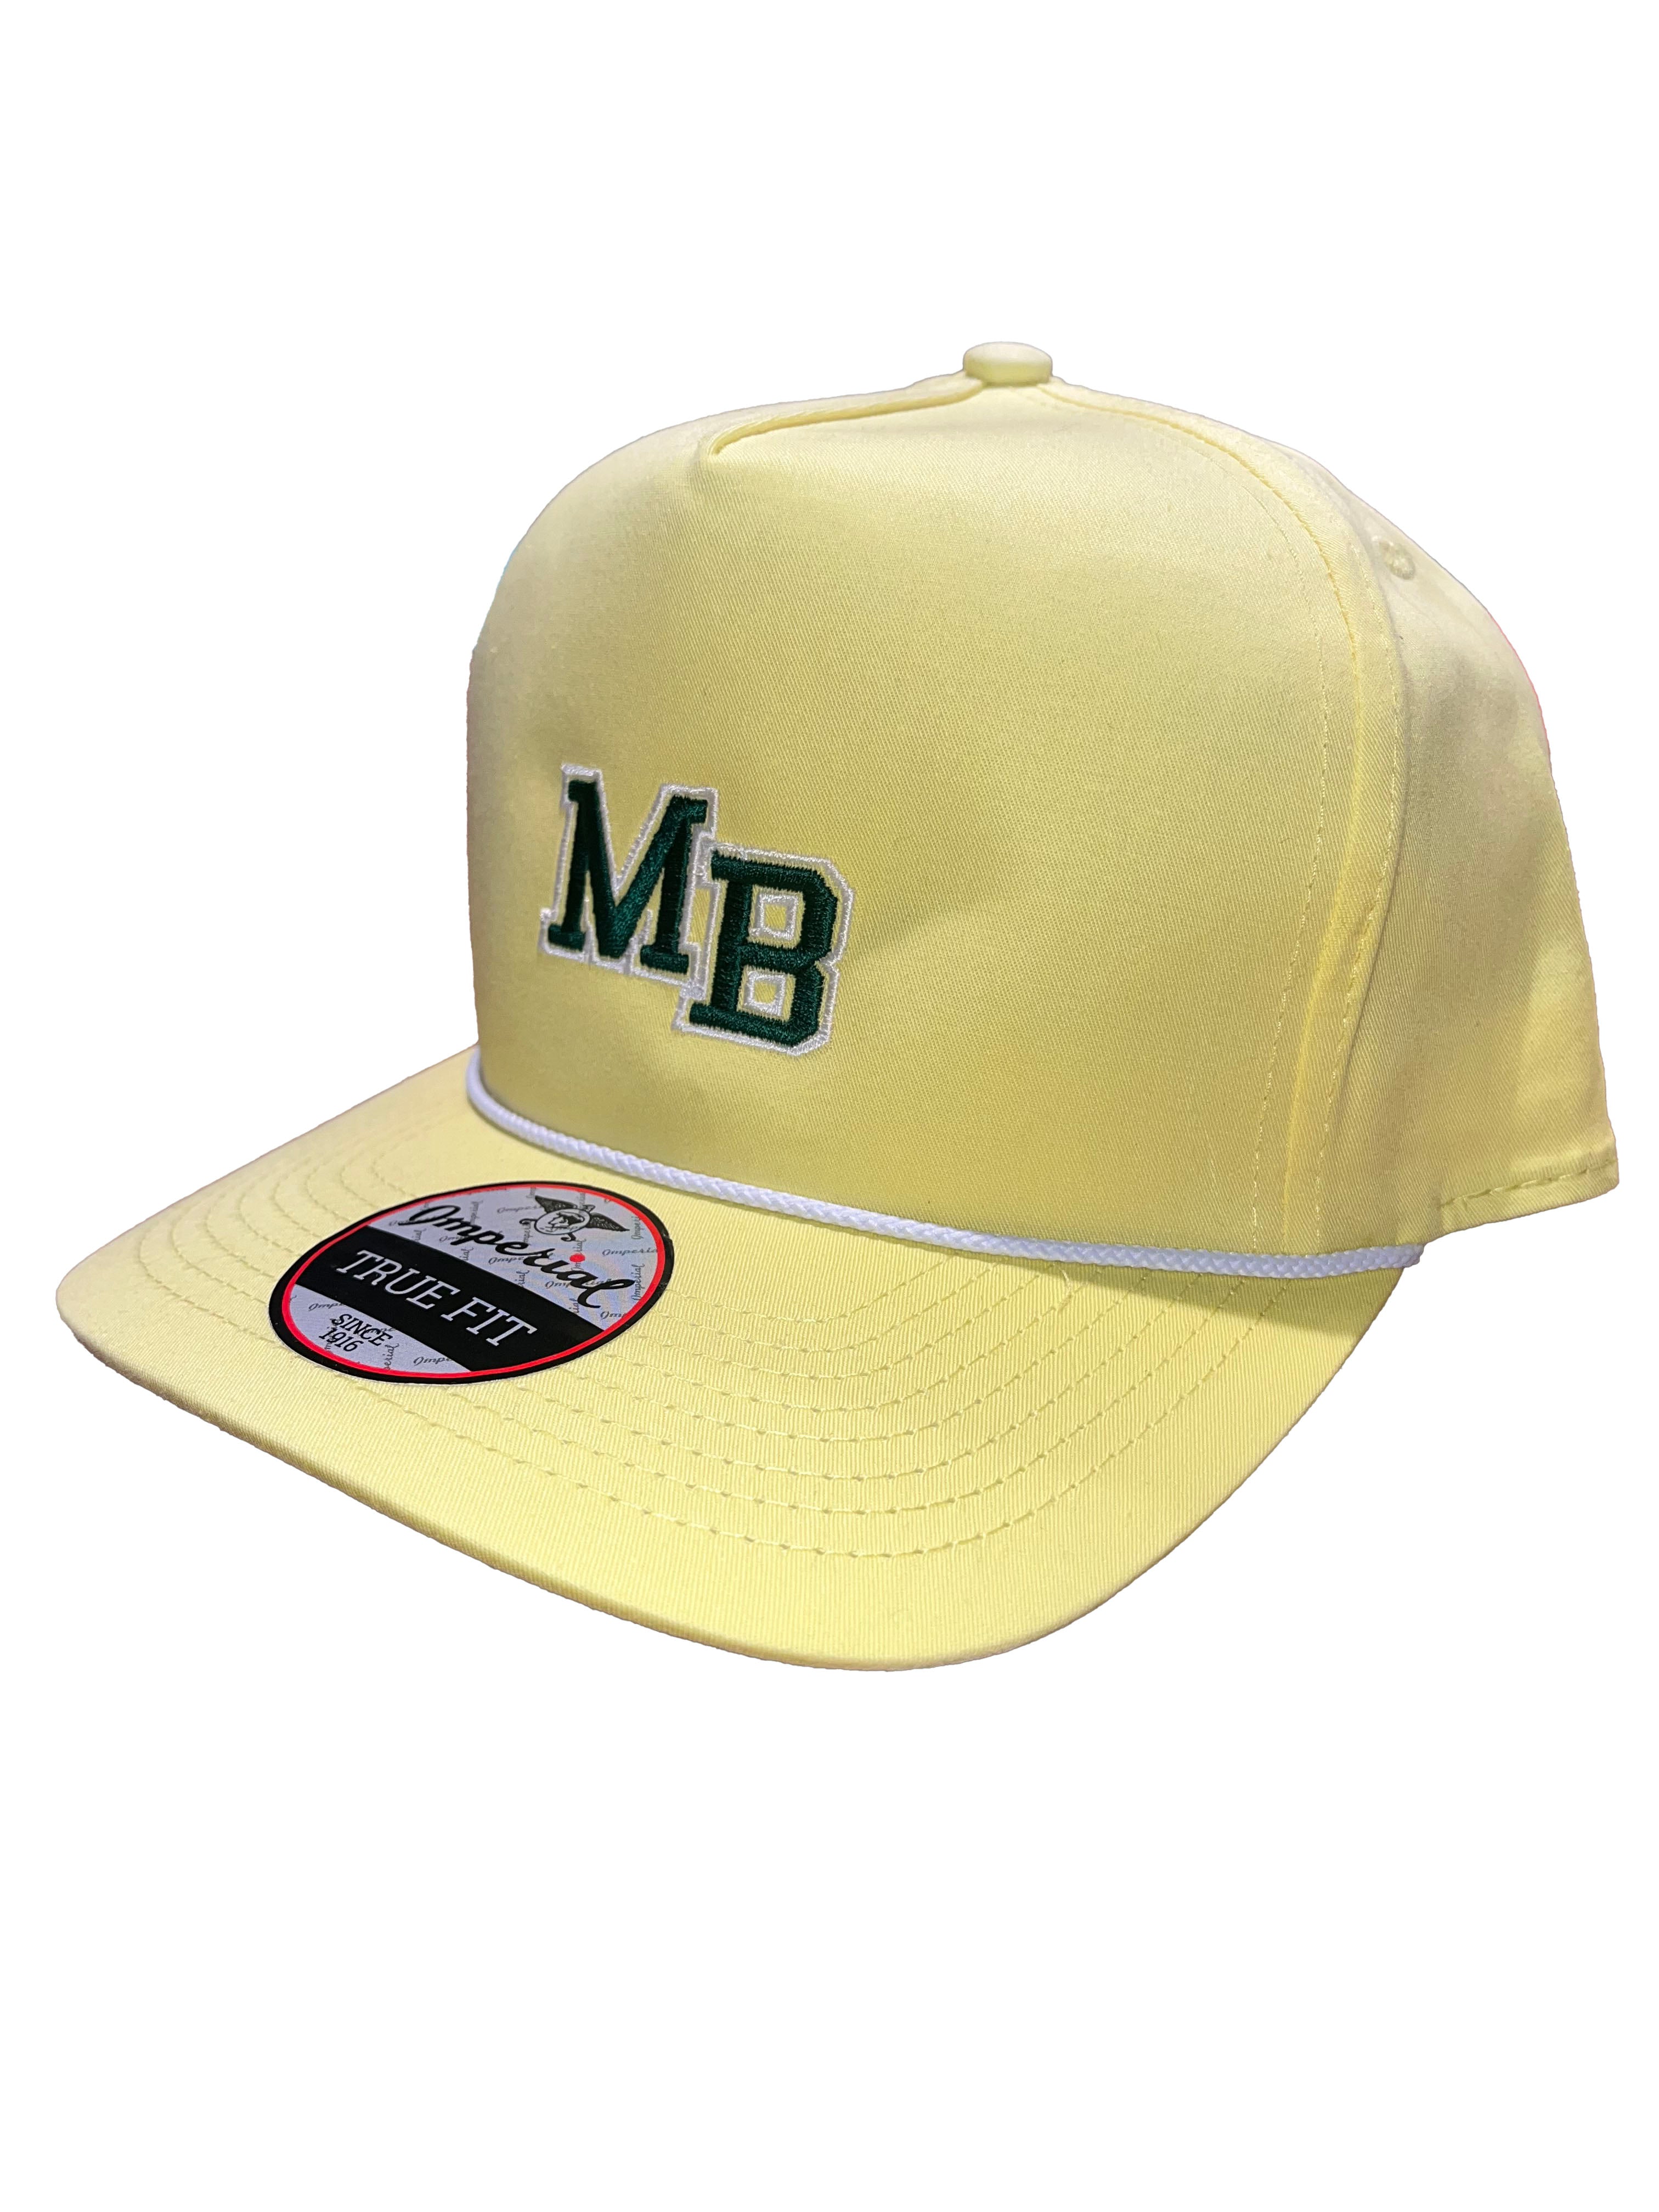 MB Rope Hat